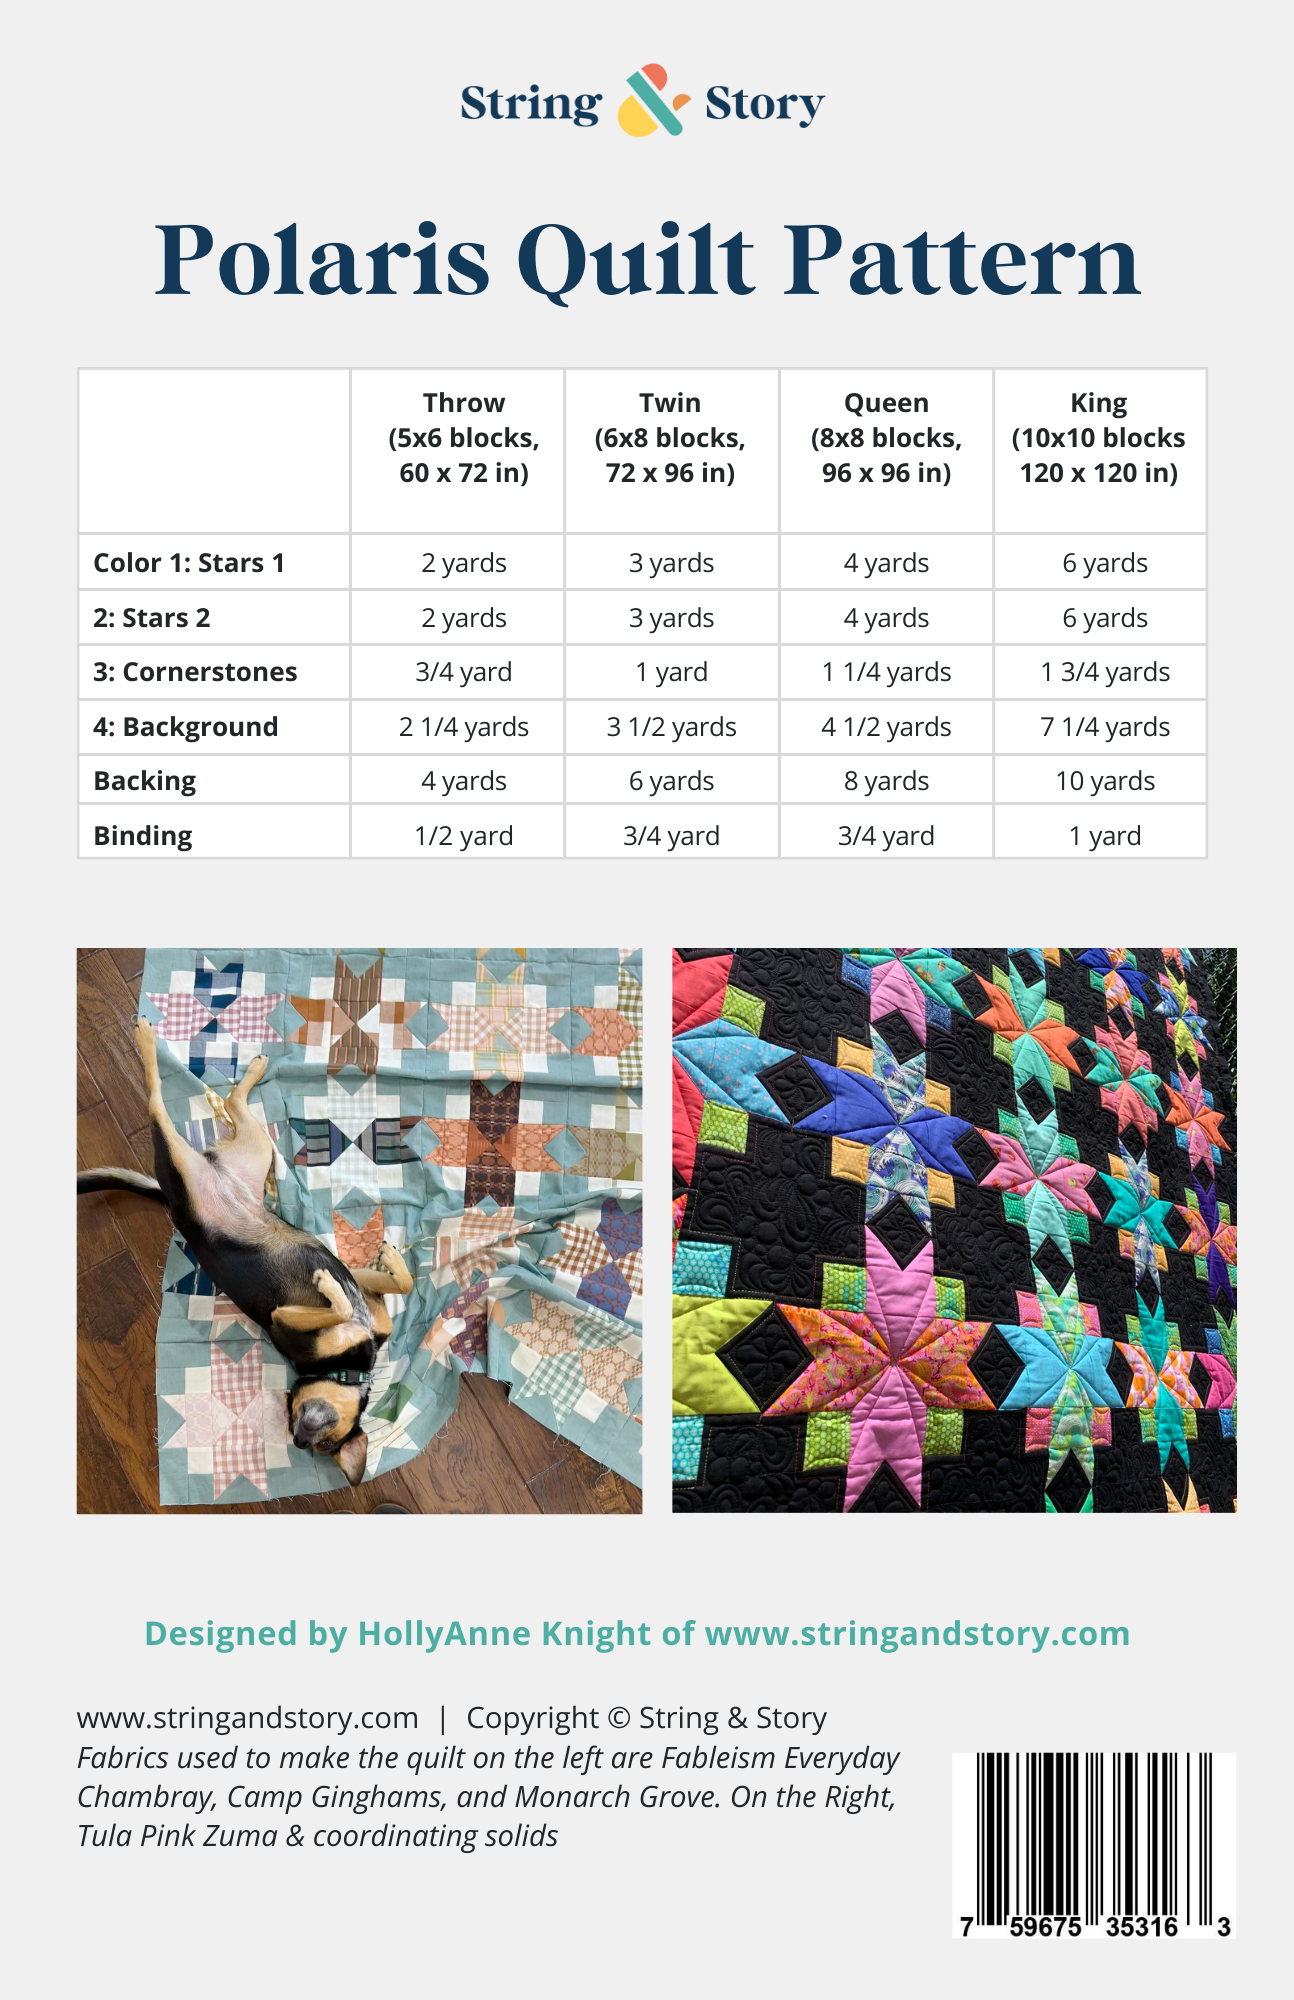 Patterns: Polaris Quilt  - DIGITAL PATTERN by HollyAnne Knight for String & Story